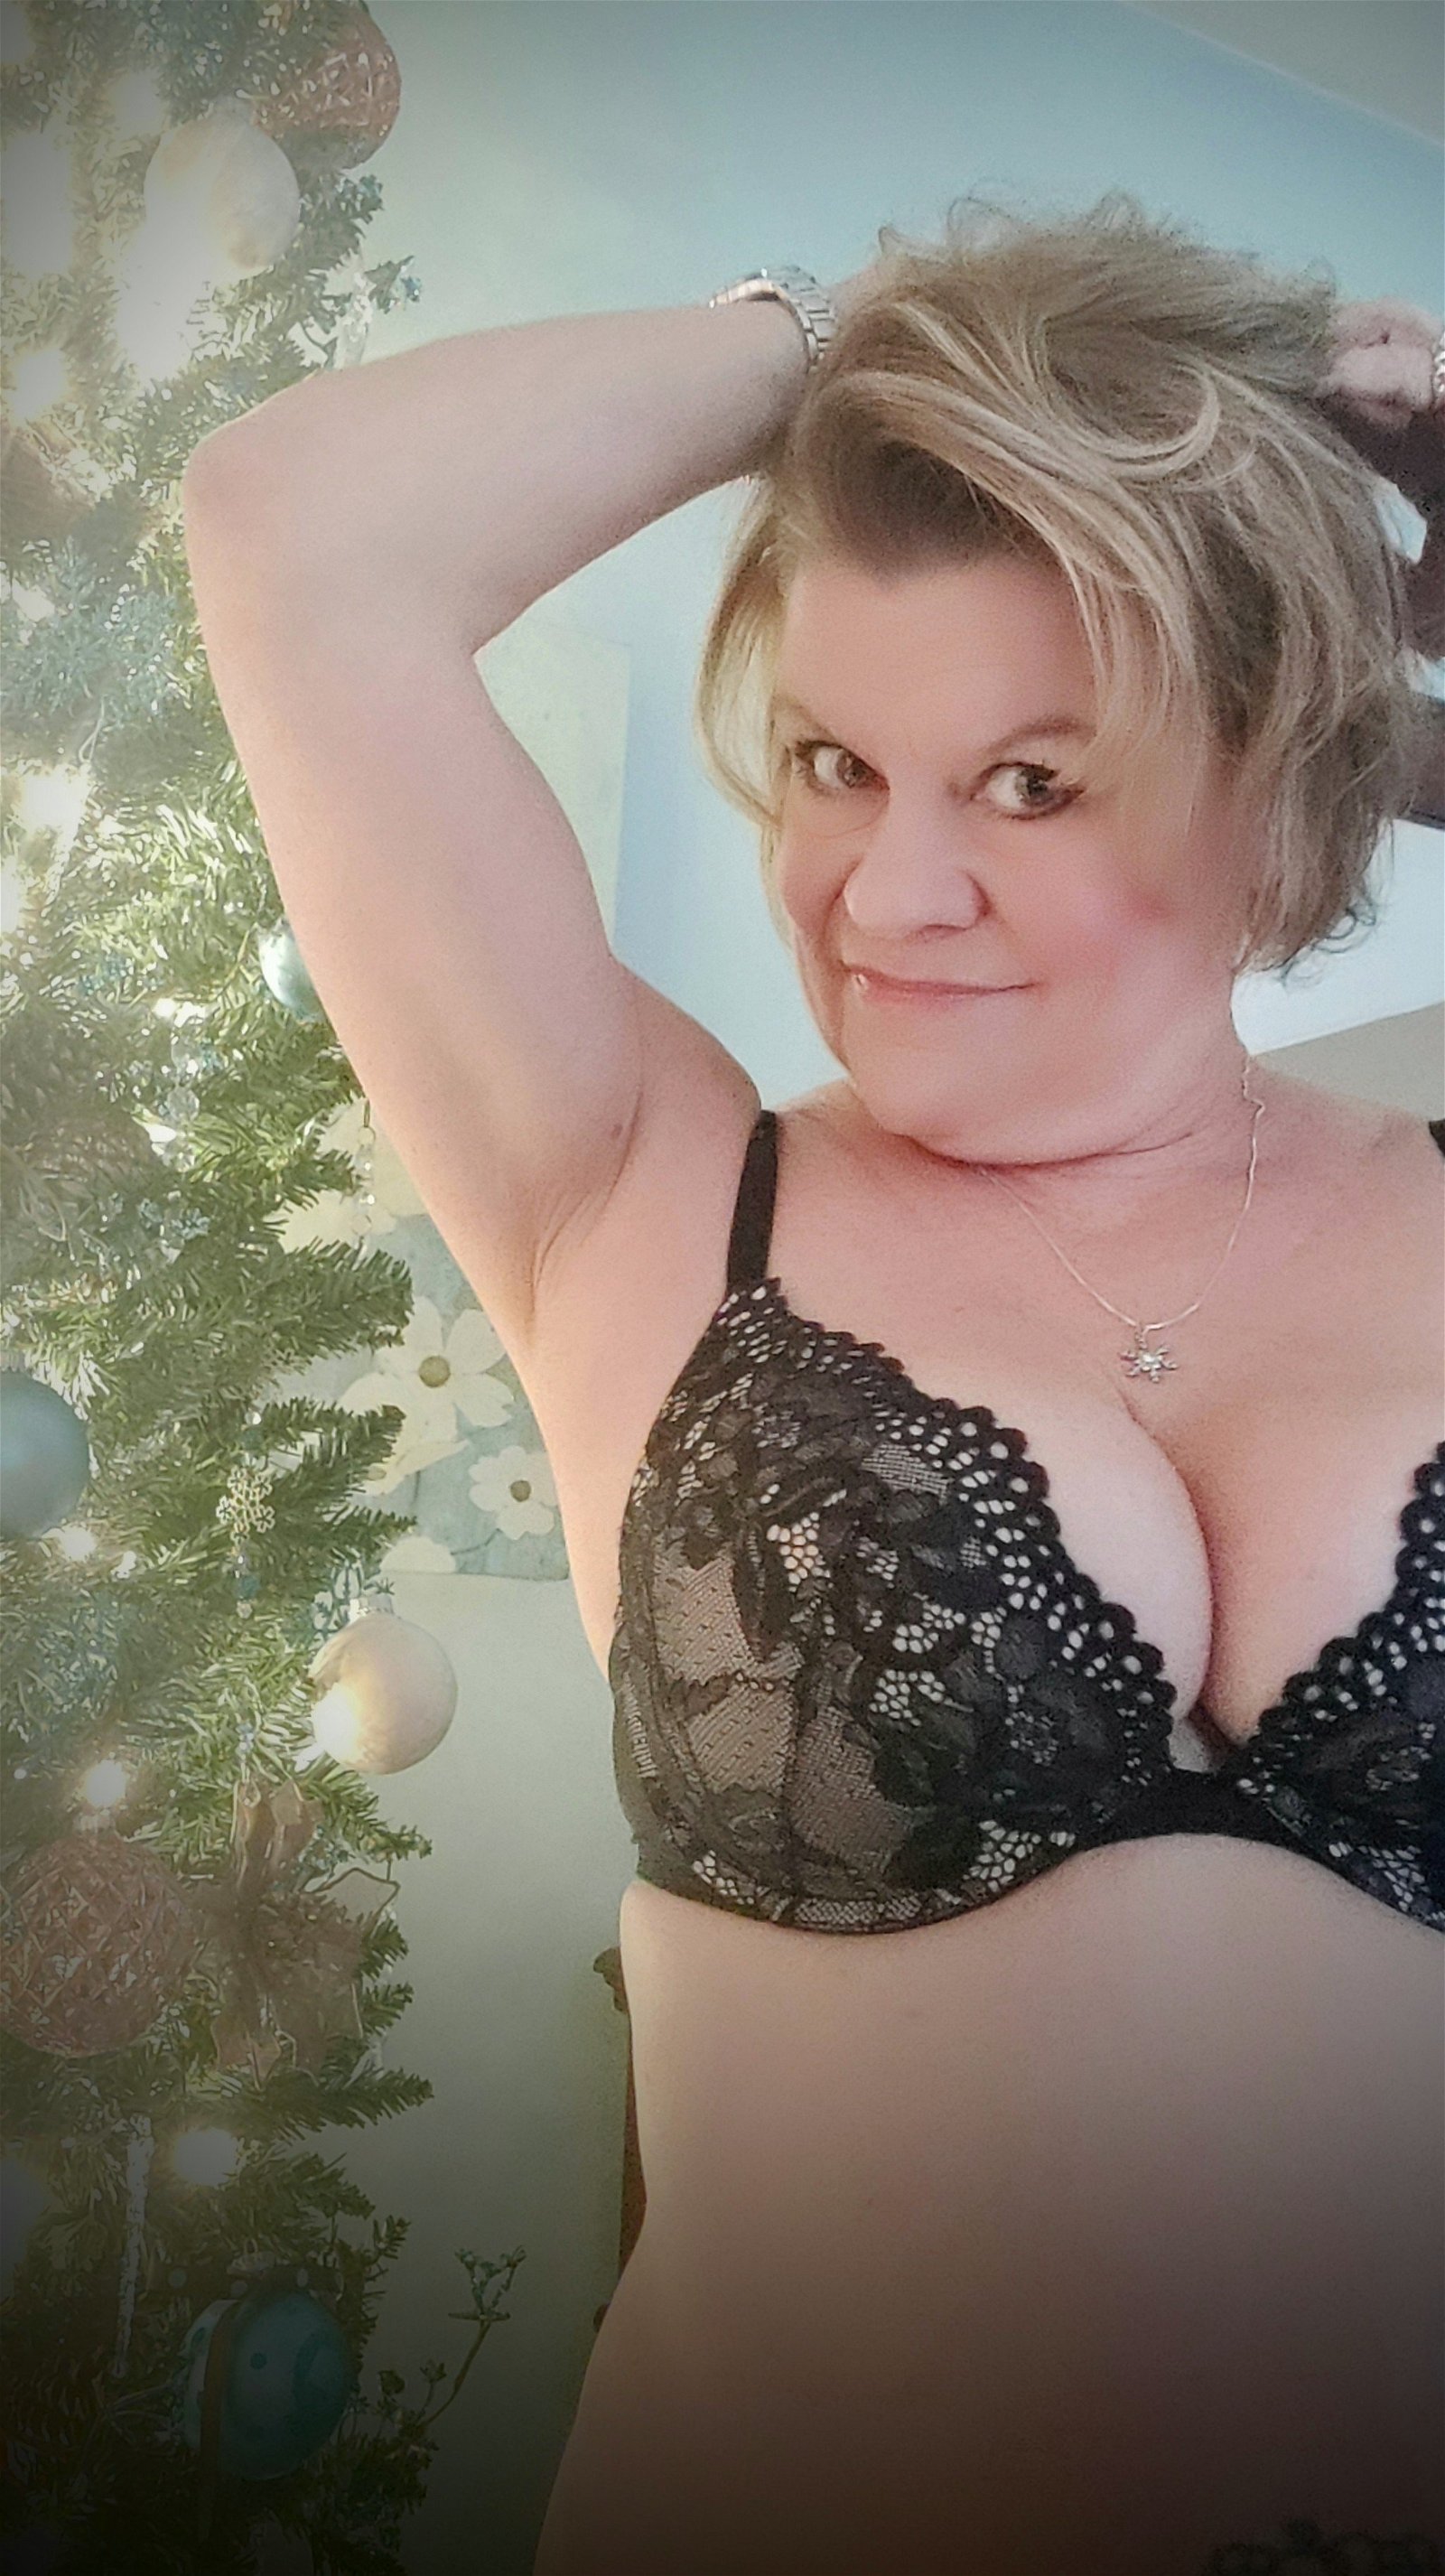 Photo by Brittanybitch4u with the username @Brittanybitch4u, who is a star user,  December 29, 2023 at 6:44 AM. The post is about the topic MILF and the text says 'Merry Christmas 🎄
Check me out on FrontFanz!
https://frontfanz.com/profile/Brittanybitch4u'